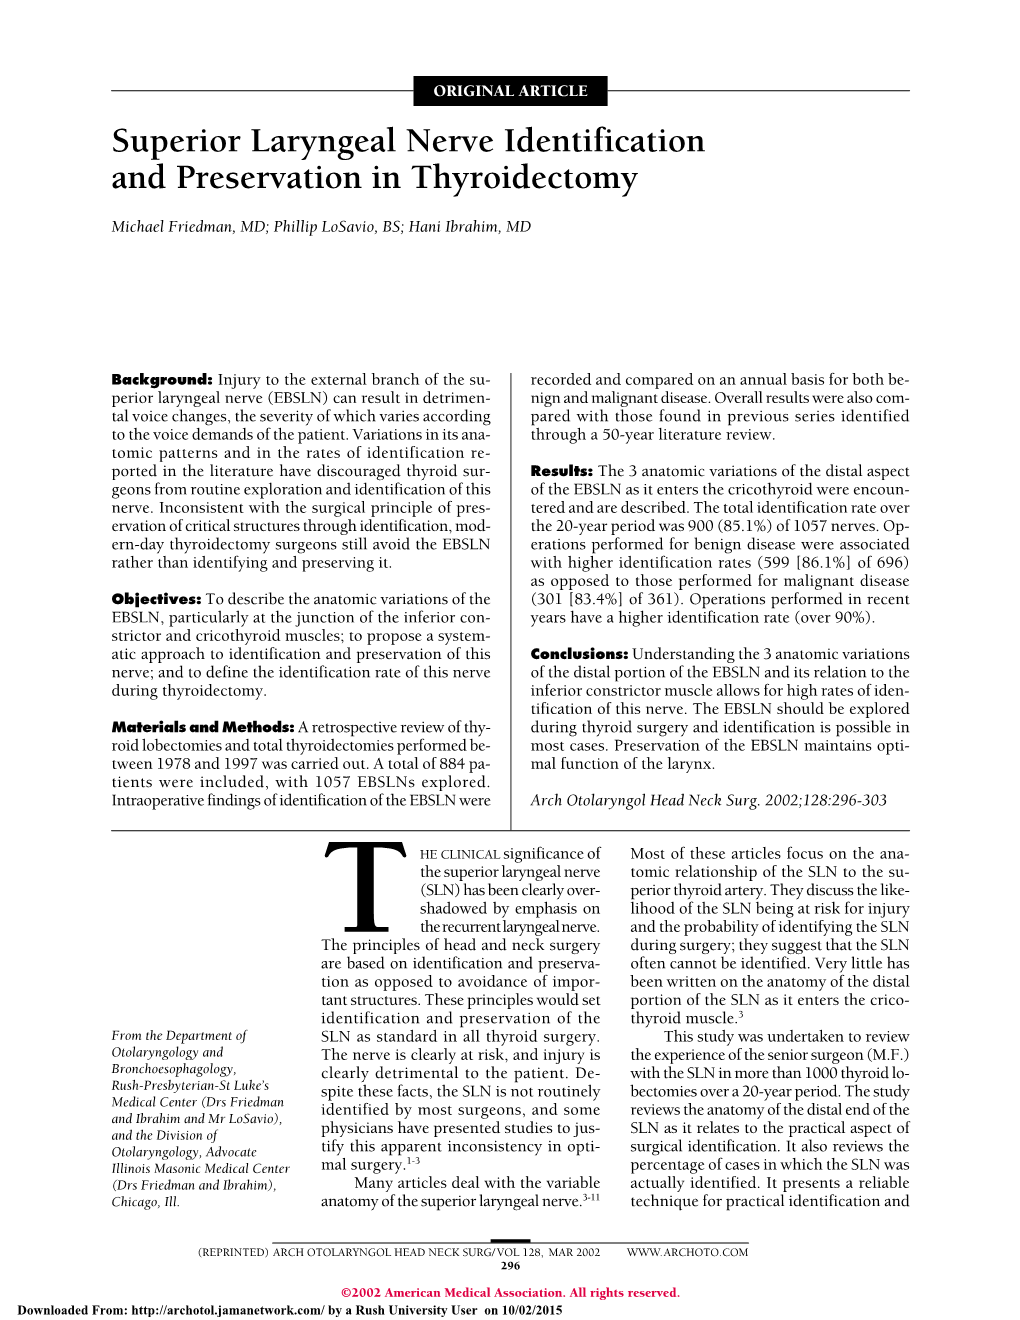 Superior Laryngeal Nerve Identification and Preservation in Thyroidectomy